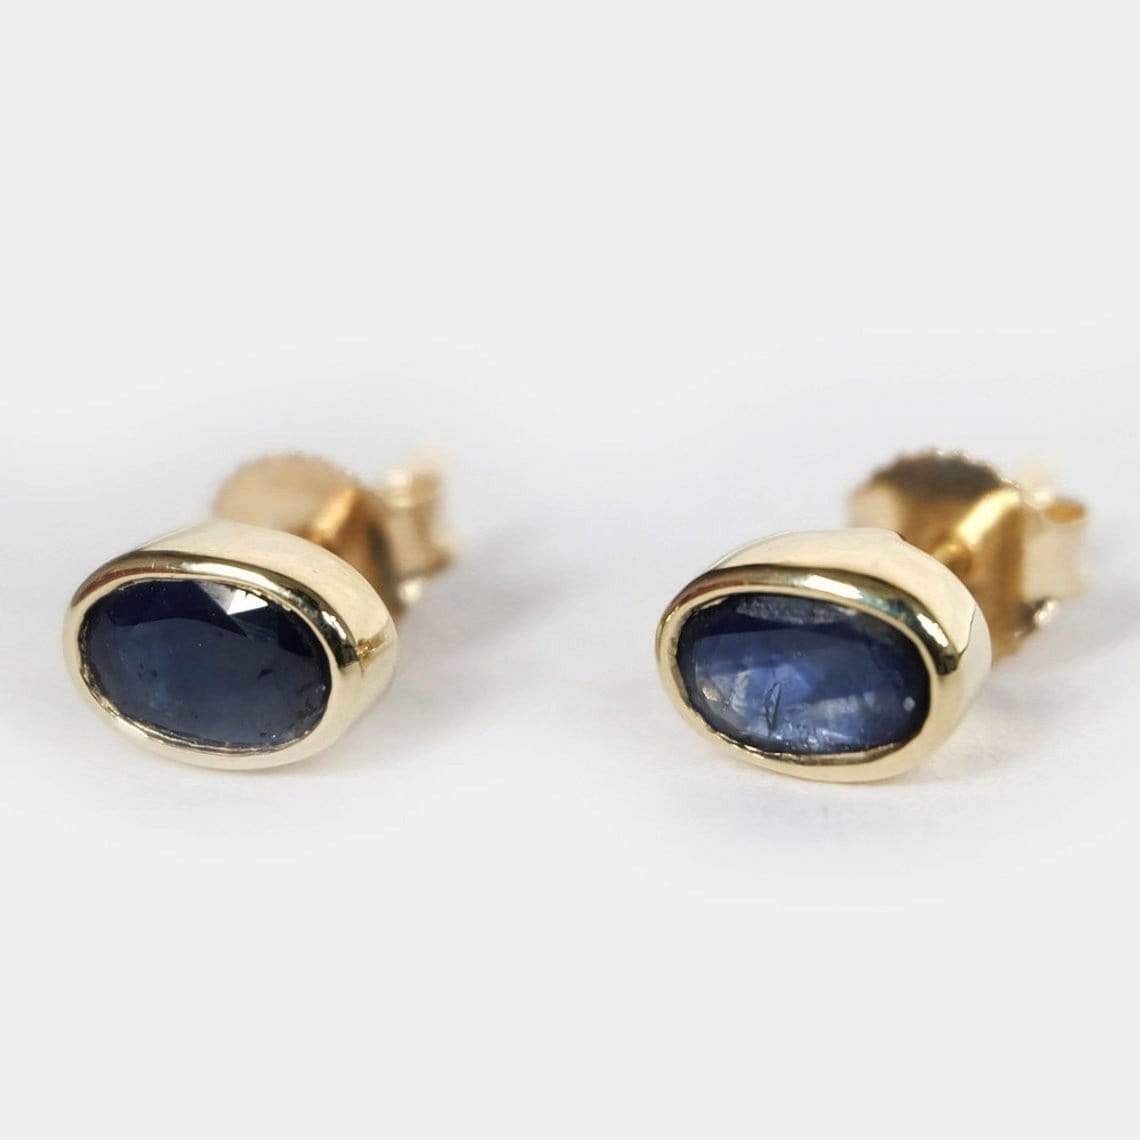 0.60 Carats 14k Solid Gold Sapphire Earrings - SOVATS